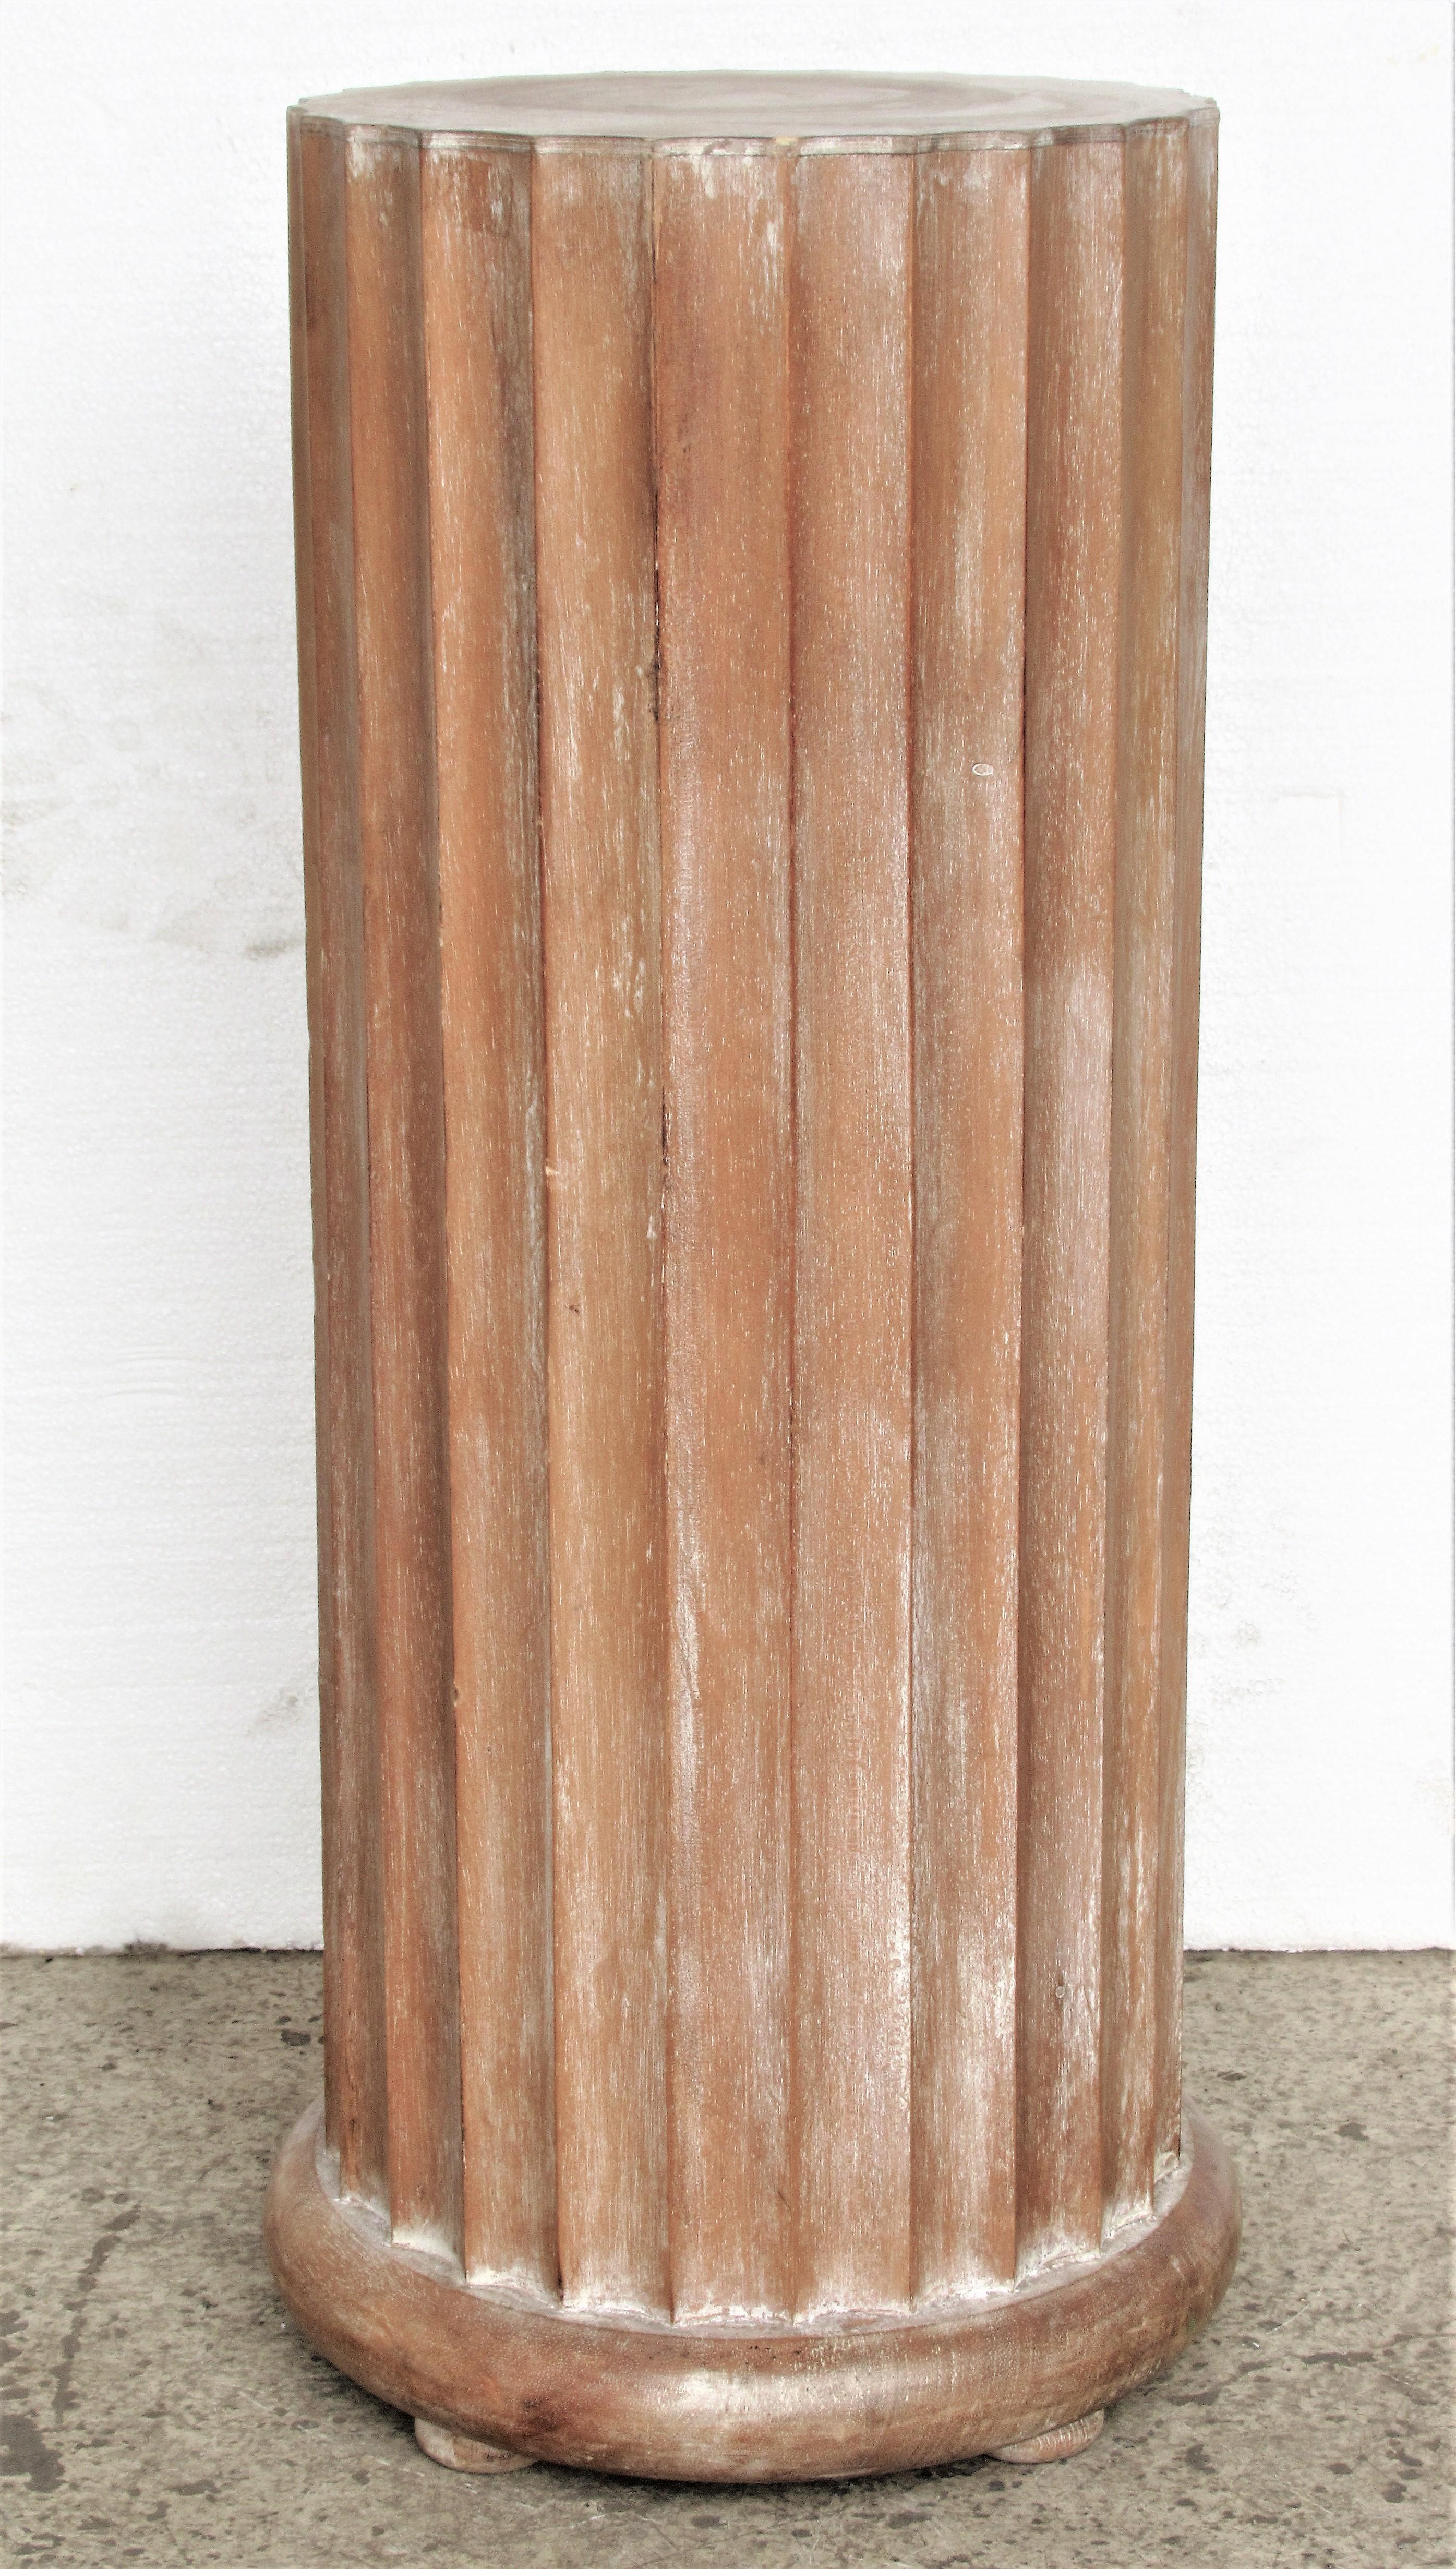 Classical style fluted pine column pedestal raised on four bun feet in all over beautifully aged original pale whitewashed surface. Ink stamped and paper labeled on underside - Made in Italy / Decorative Crafts Inc. / Handcrafted Imports, circa